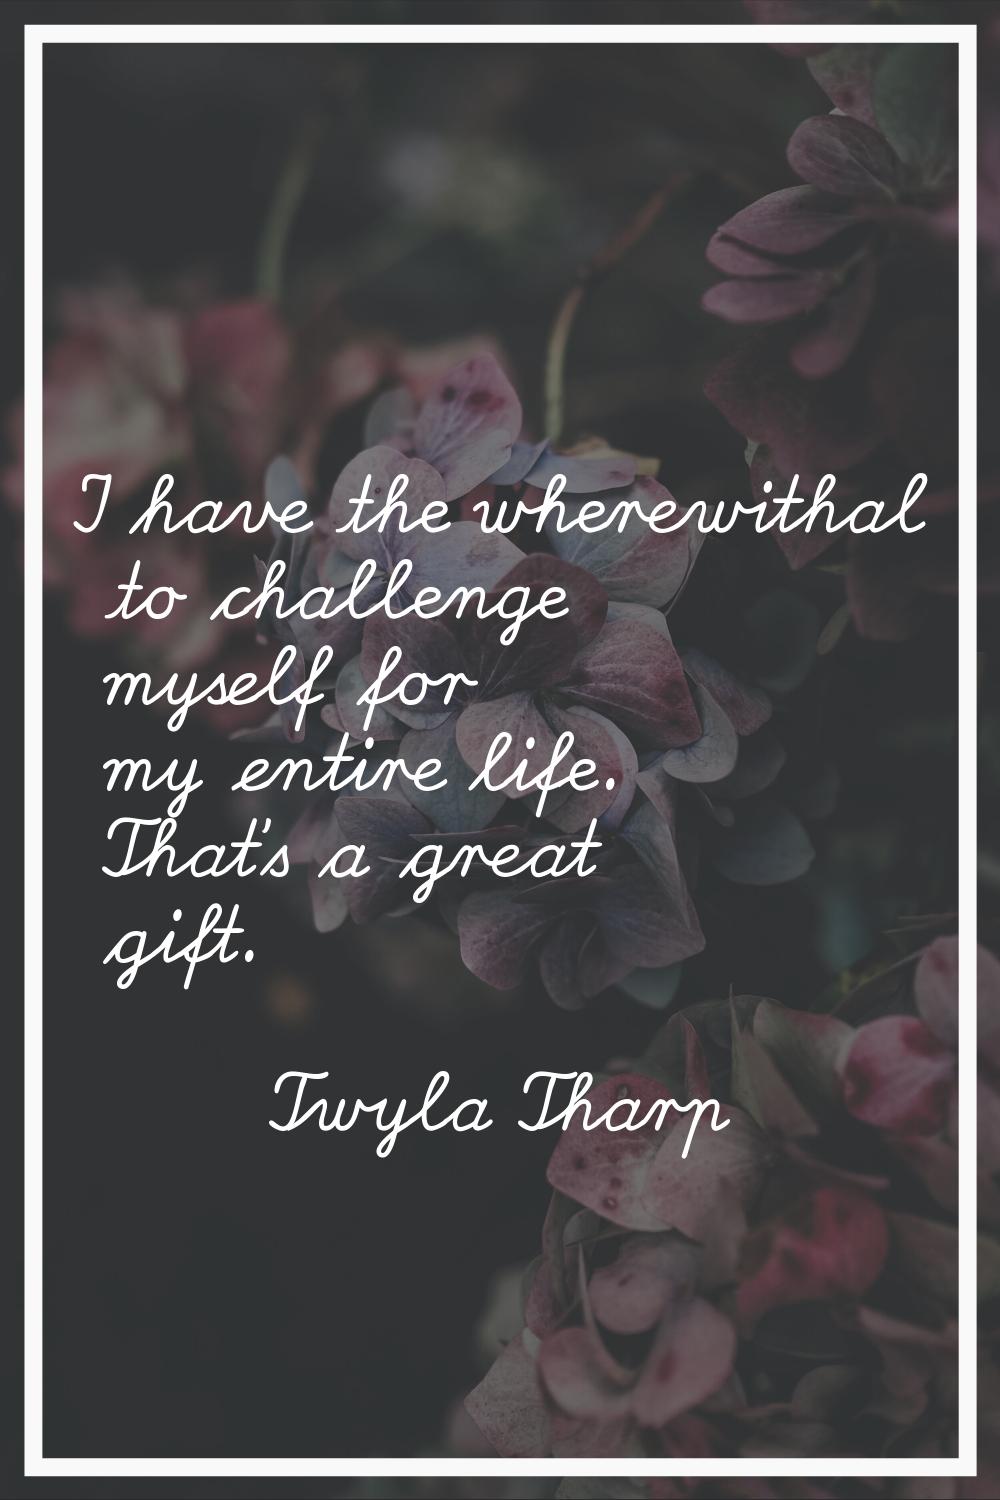 I have the wherewithal to challenge myself for my entire life. That's a great gift.